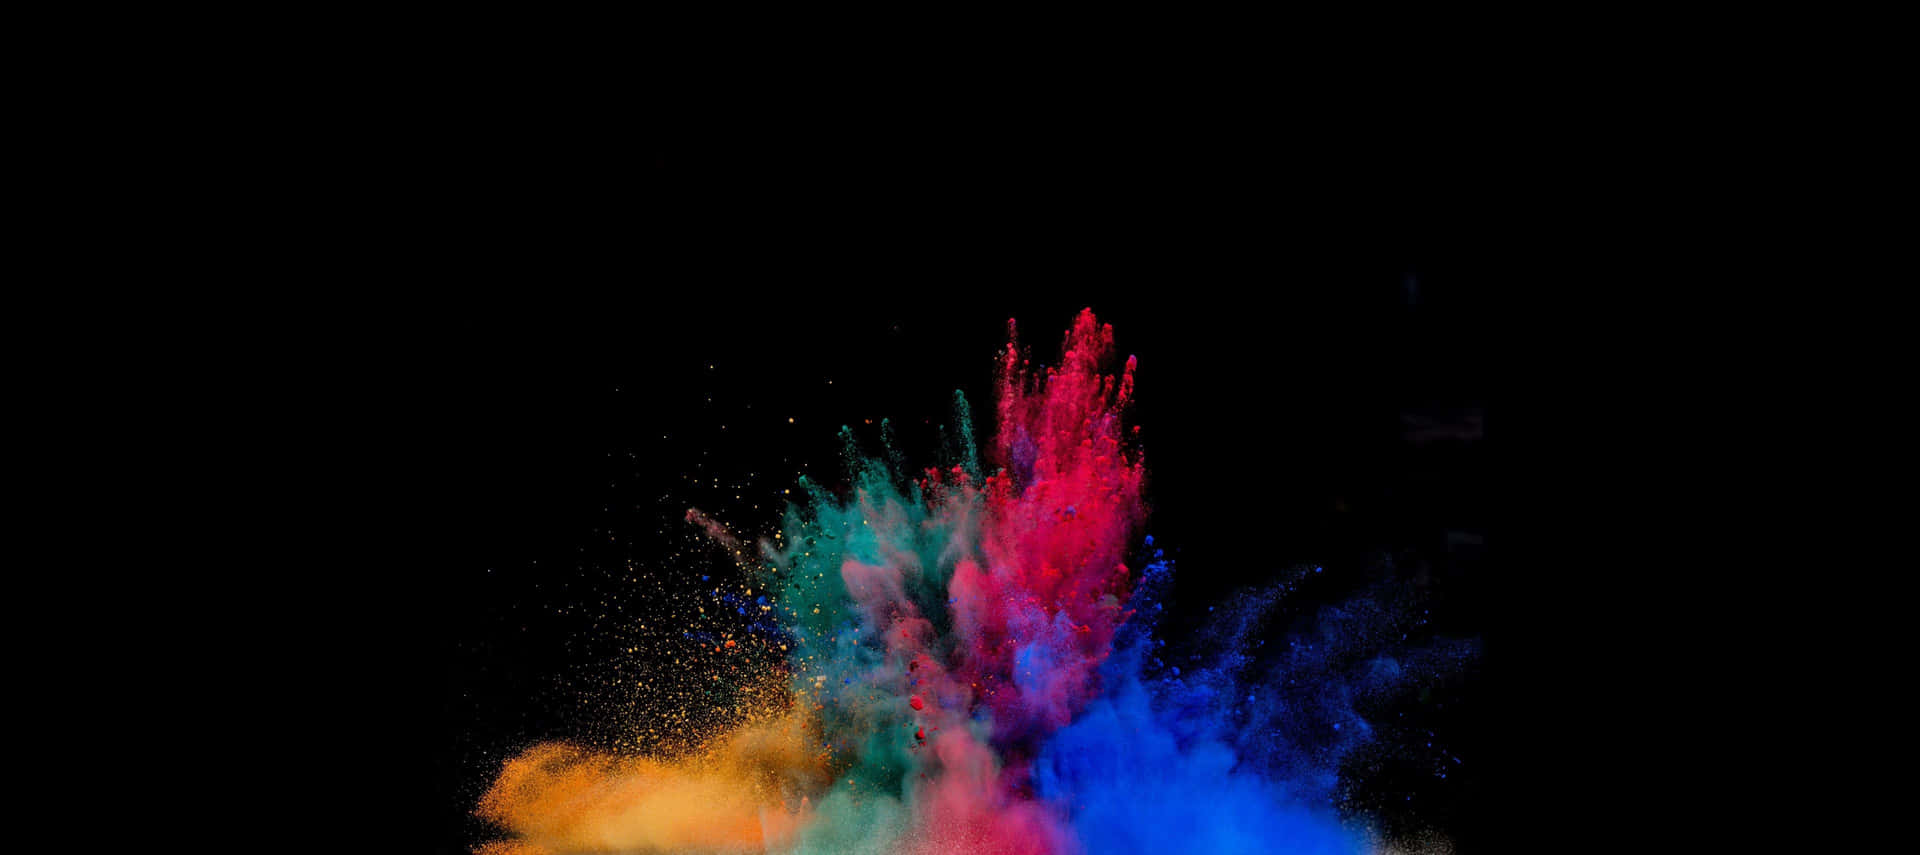 Amoled Laptop Burst Of Colors Abstract Wallpaper